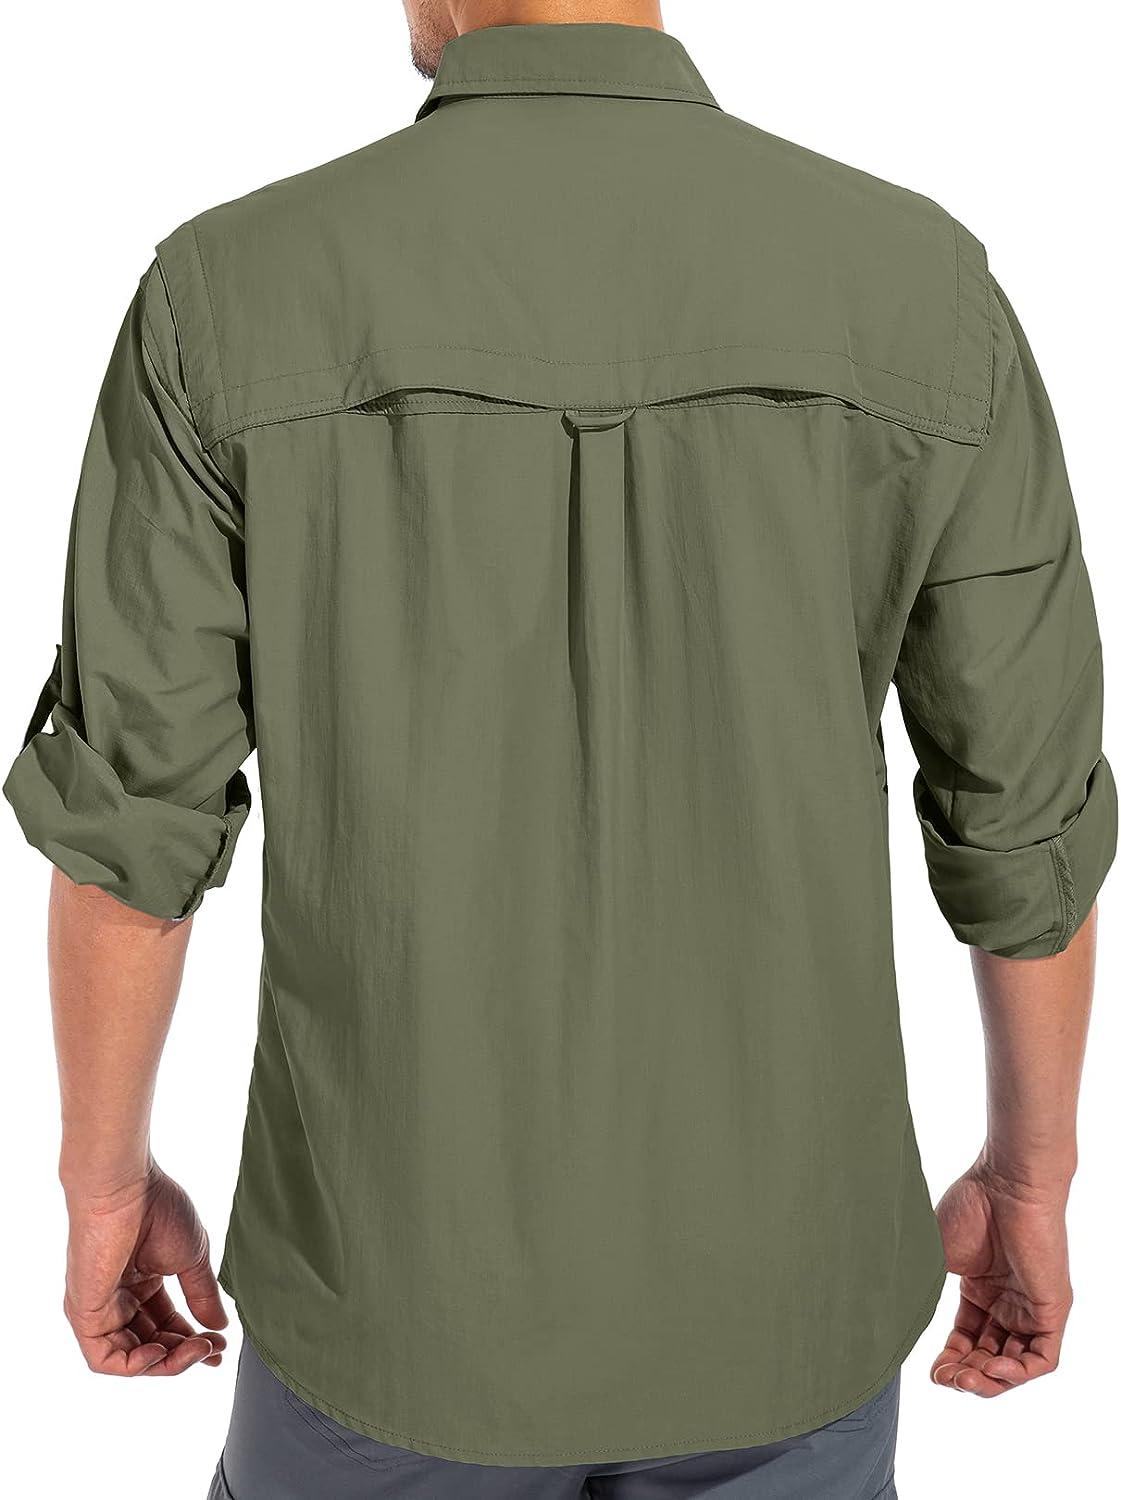 Best Deal for and Collar Shirts Sun Shirts for Men Olive Green